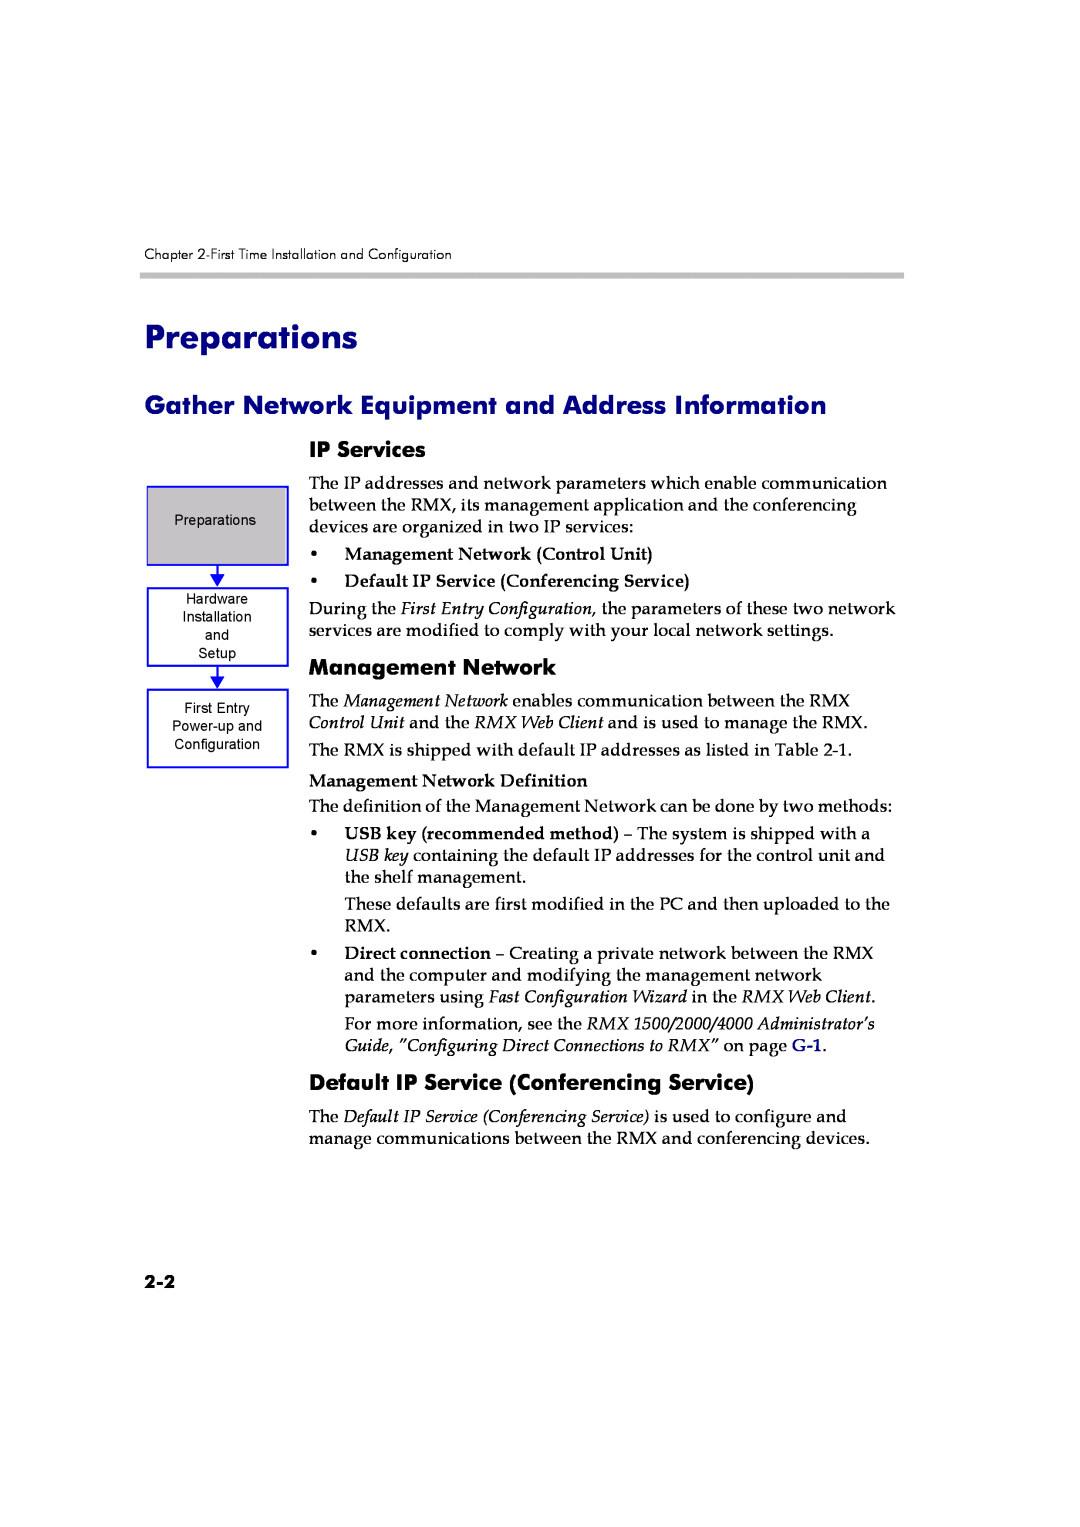 Polycom DOC2560B manual Preparations, Gather Network Equipment and Address Information, IP Services, Management Network 